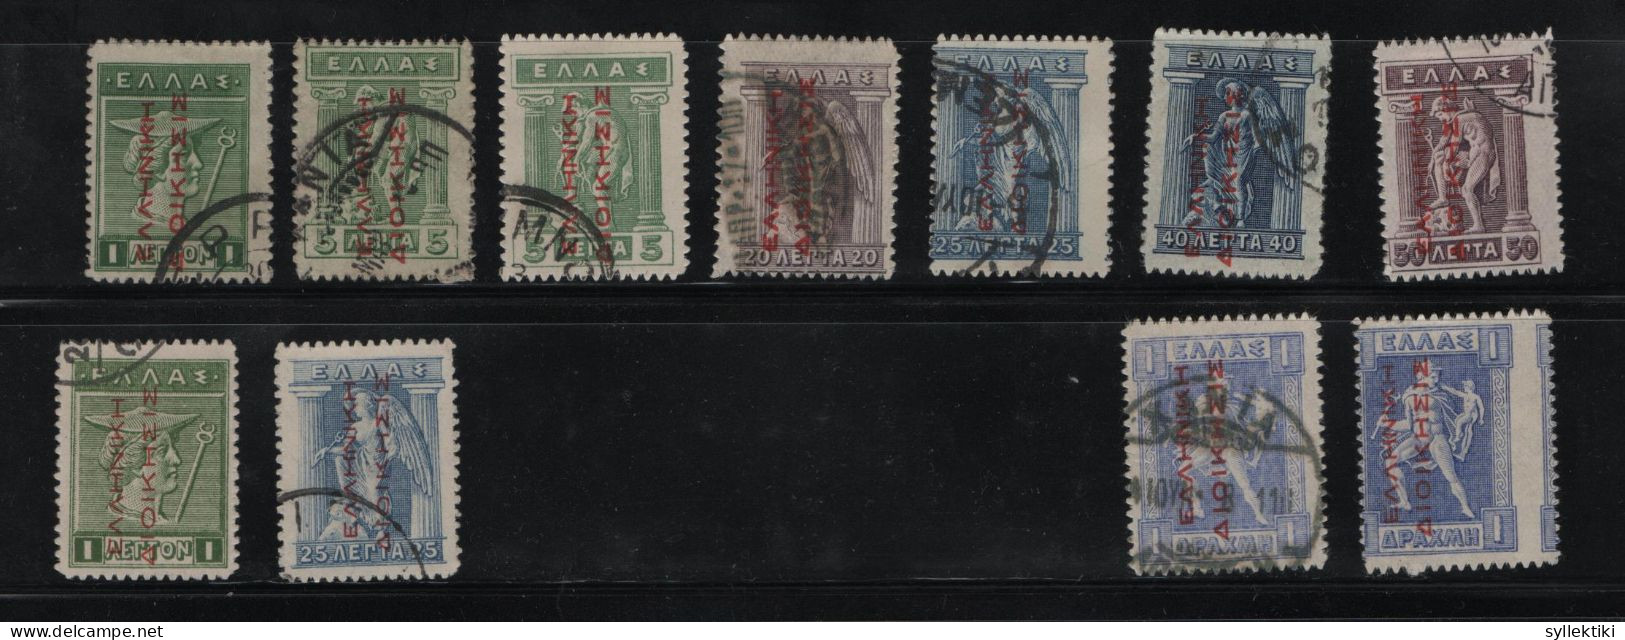 GREECE 1913 GREEK ADMIN READING UP RED & CARMIN 1 LEPTON - 1 DRACHMA 11 USED STAMPS  HELLAS No 271 - 278, 290, 295 AND V - Oblitérés